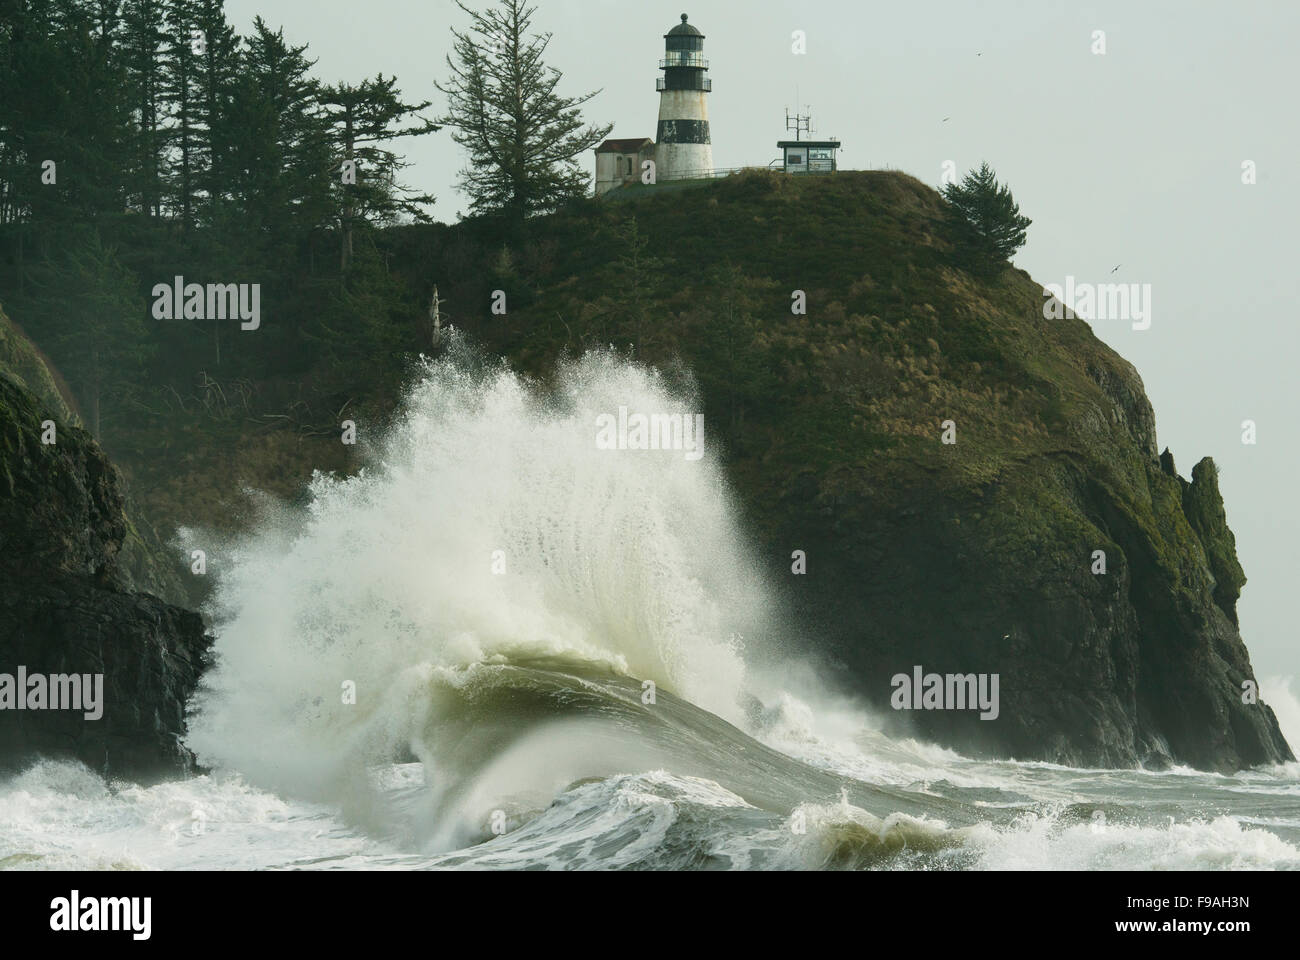 Massive waves crash into Cape Disappointment at mouth of Columbia River, December 2015, Washington State USA Stock Photo